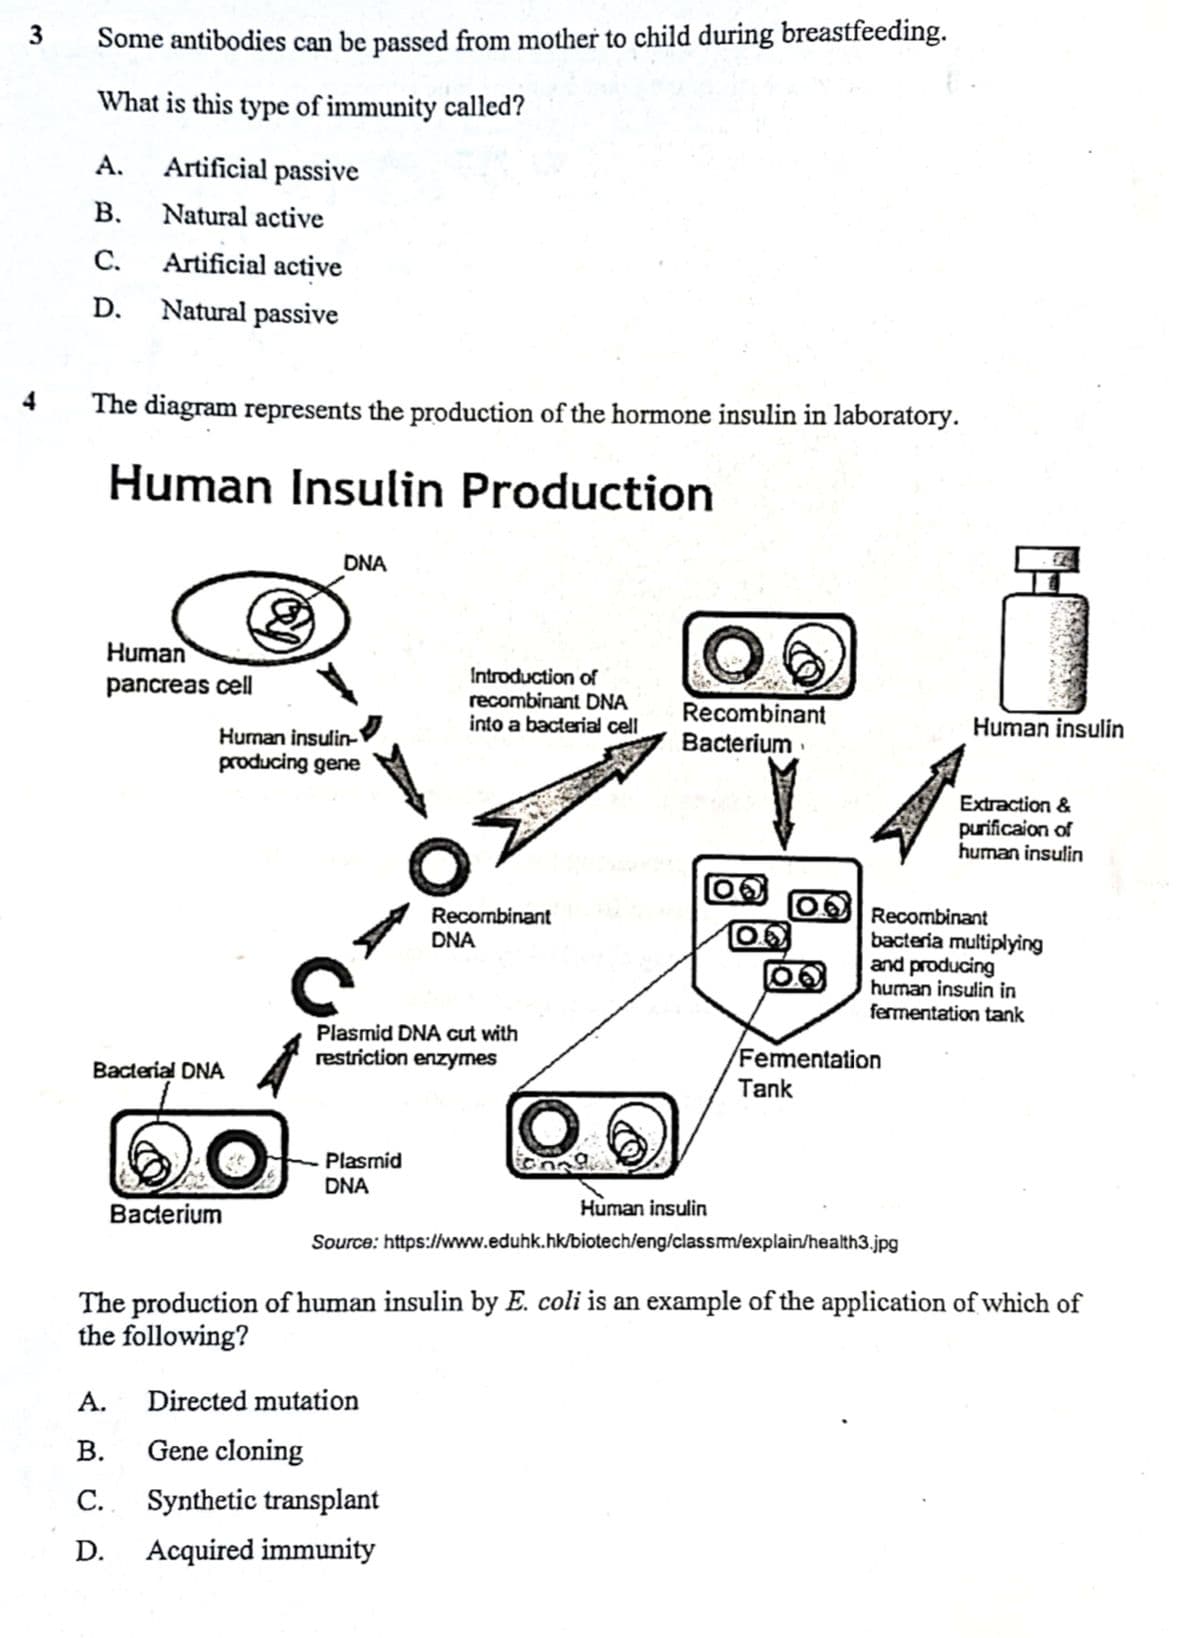 3
4
Some antibodies can be passed from mother to child during breastfeeding.
What is this type of immunity called?
A. Artificial passive
B.
Natural active
C.
Artificial active
D. Natural passive
The diagram represents the production of the hormone insulin in laboratory.
Human Insulin Production
Human
pancreas cell
Bacterial DNA
&
Human insulin-
producing gene
60
Bacterium
DNA
Plasmid
DNA
Introduction of
recombinant DNA
into a bacterial cell
Plasmid DNA cut with
restriction enzymes
Recombinant
DNA
A. Directed mutation
B.
Gene cloning
C.
Synthetic transplant
D.
Acquired immunity
Recombinant
Bacterium
OO
Fermentation
Tank
Human insulin
Recombinant
bacteria multiplying
and producing
human insulin in
fermentation tank
Human insulin
https://www.eduhk.hk/biotech/eng/classm/explain/health3.jpg
Extraction &
purificaion of
human insulin
Source:
The production of human insulin by E. coli is an example of the application of which of
the following?